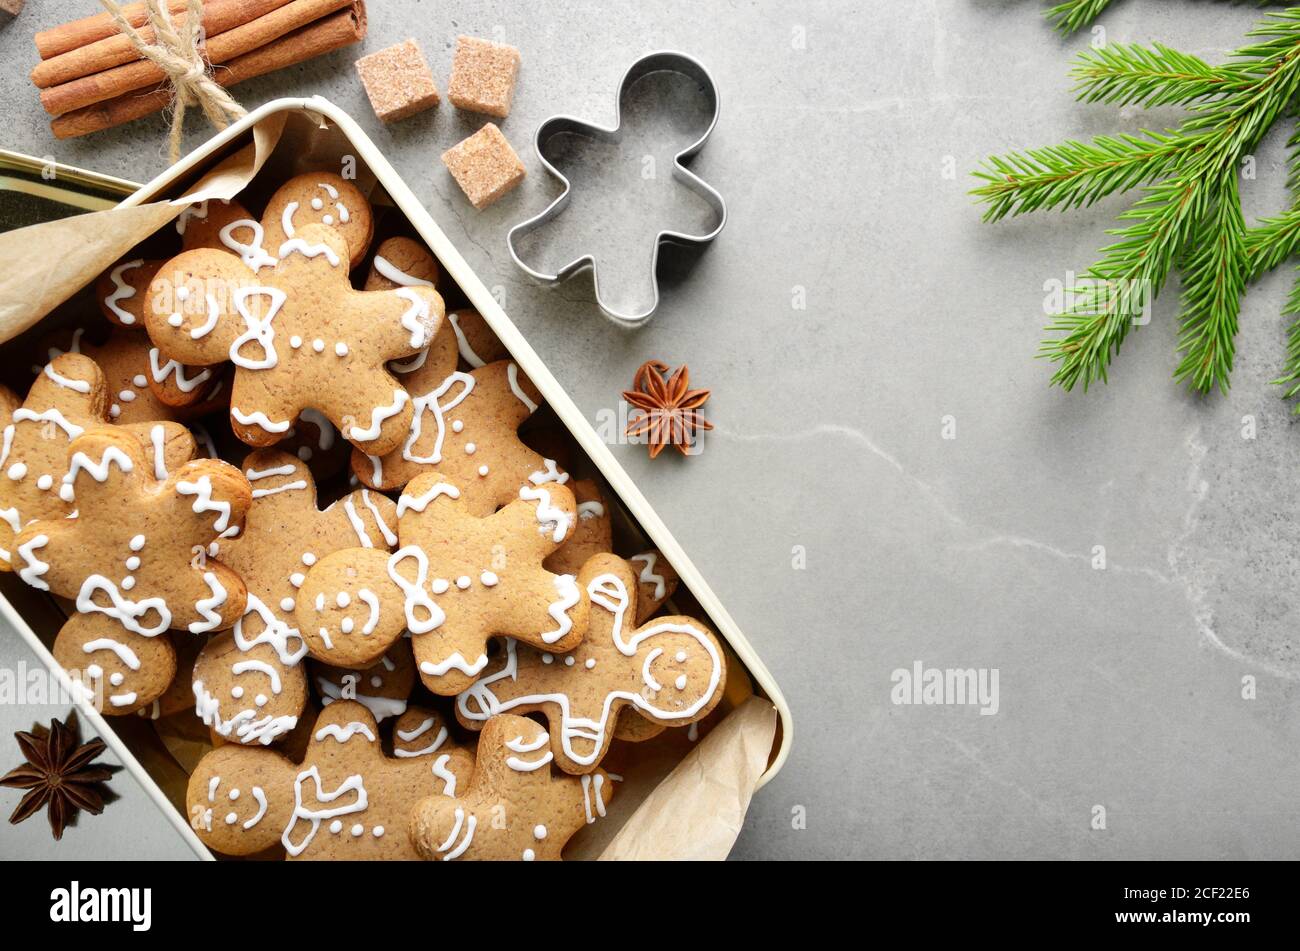 Flat Lay With Christmas Cookies On Baking Pan Christmas Wreath And Cookie  Cuttrers On Wooden Surface Stock Photo - Download Image Now - iStock